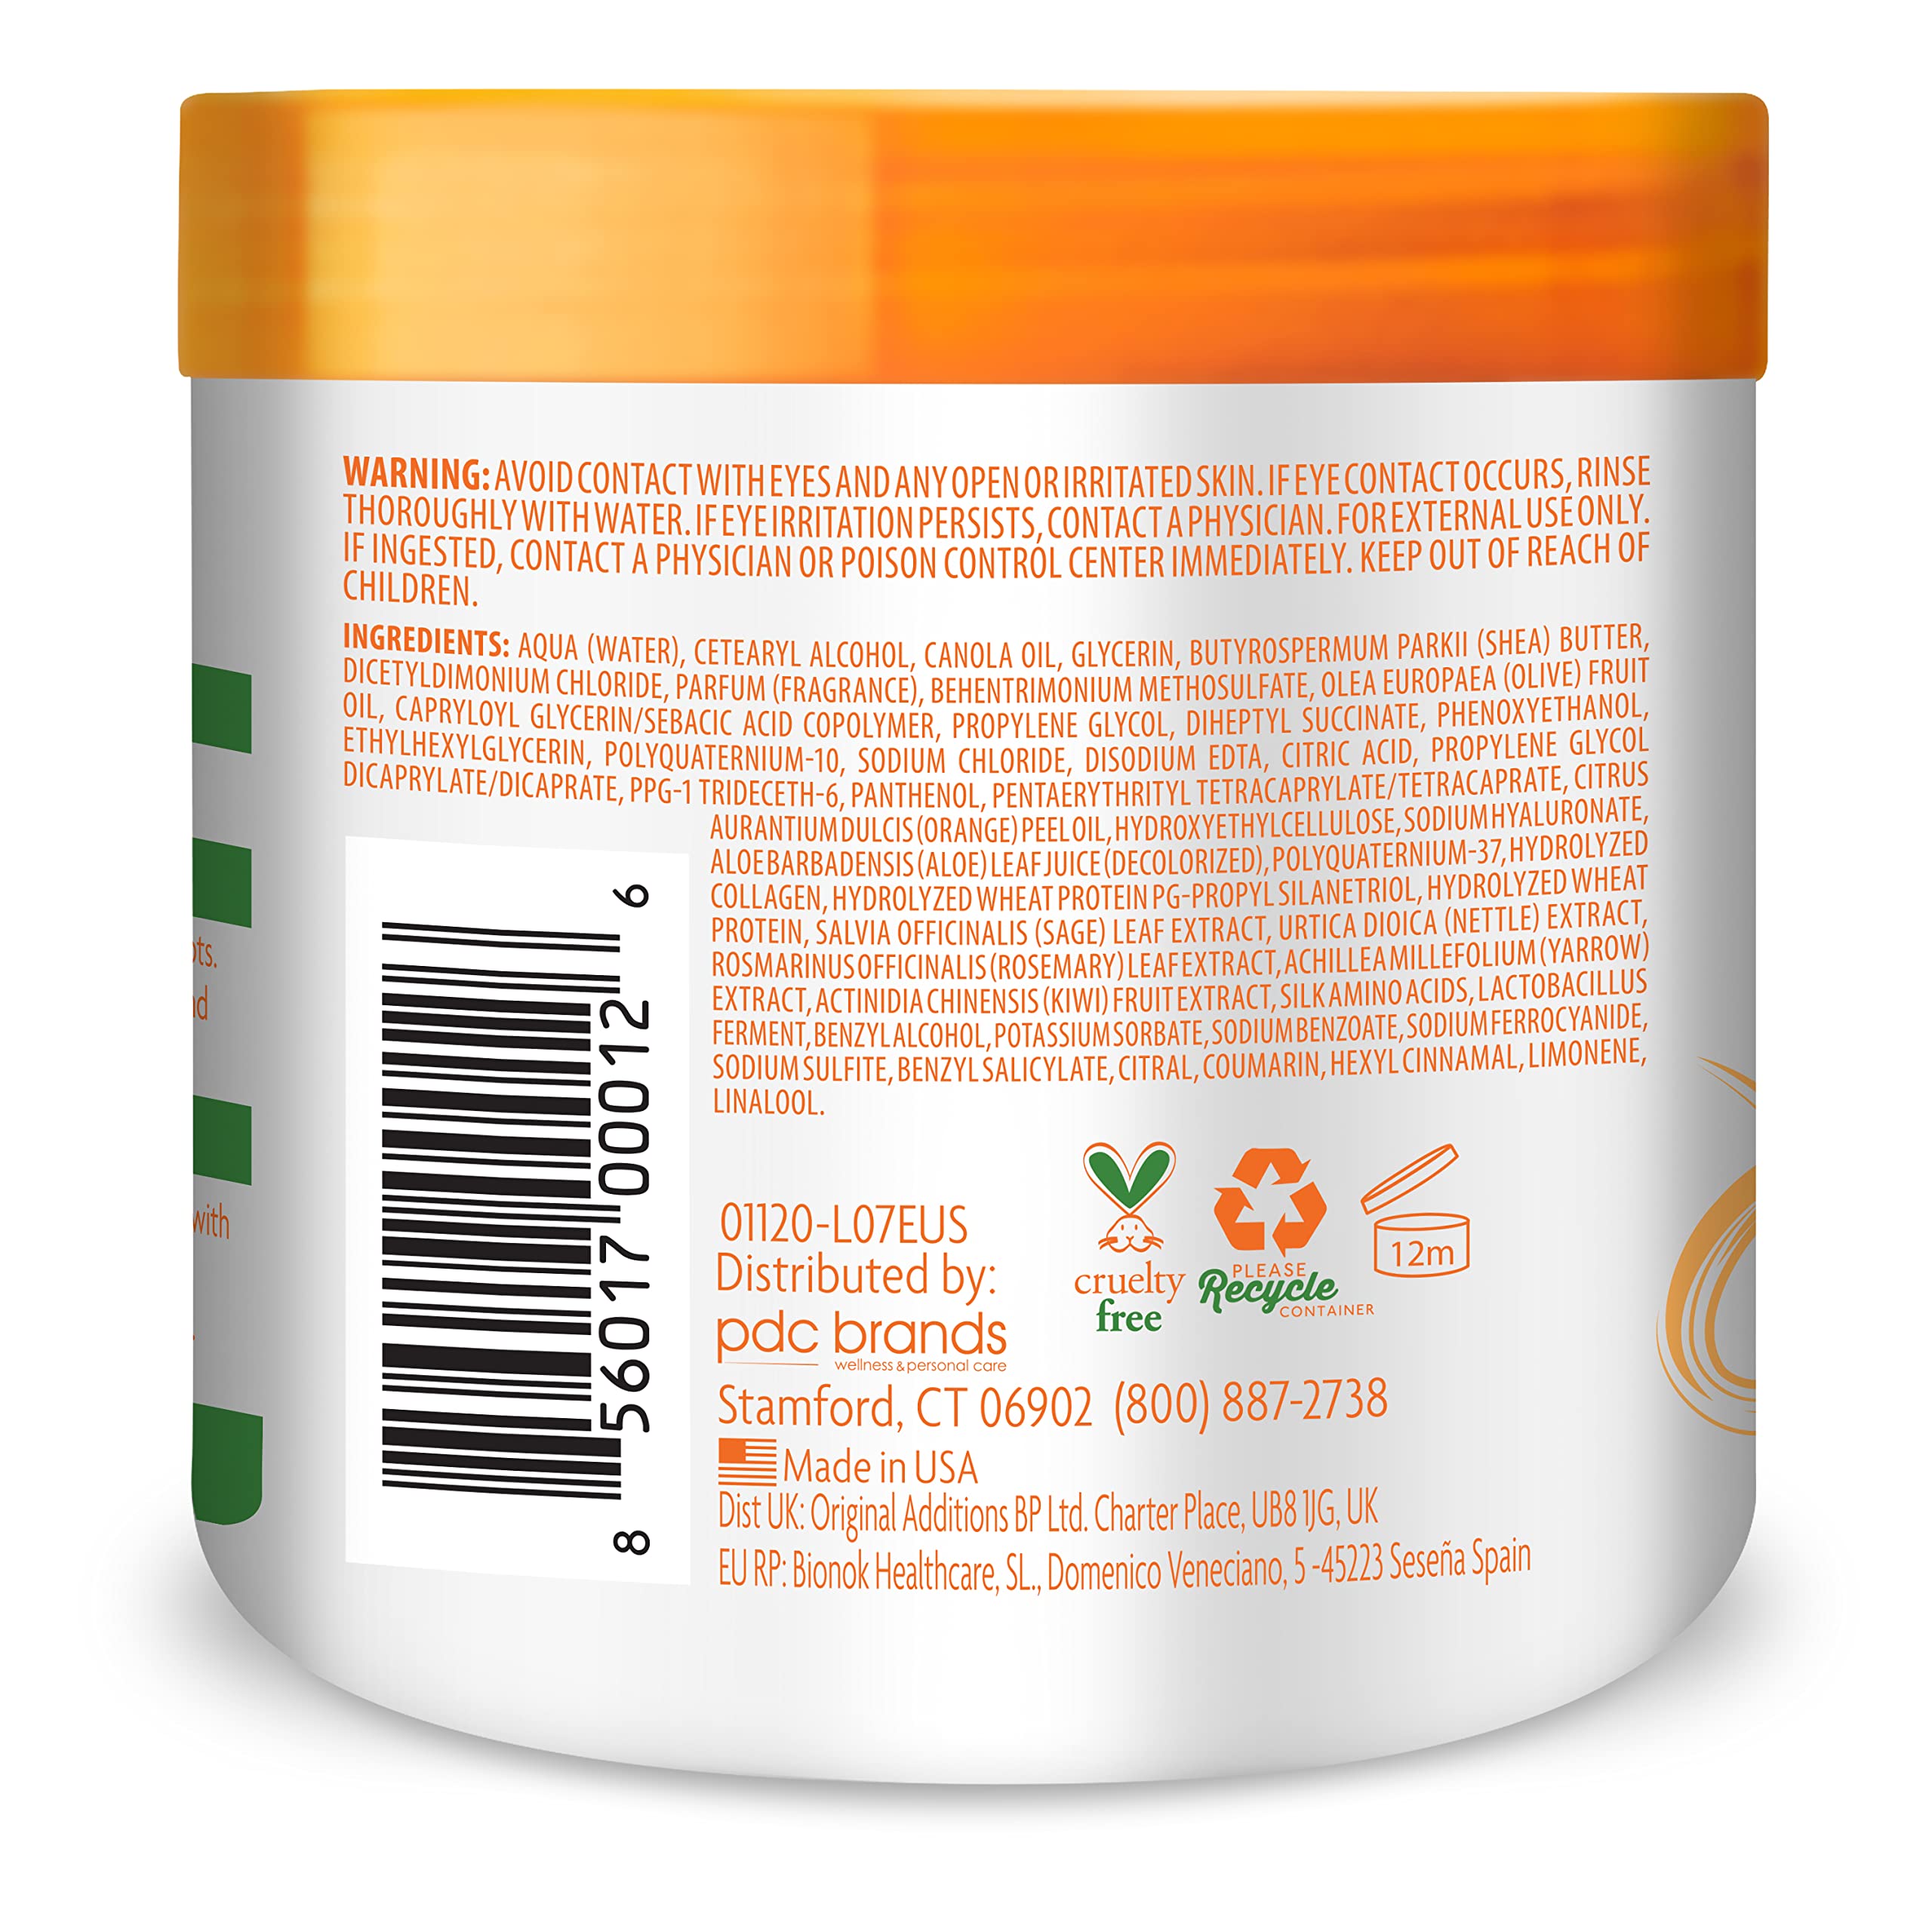 Cantu Leave-In Conditioning Repair Cream with Shea Butter, 16 oz (Pack of 2) (Packaging May Vary)